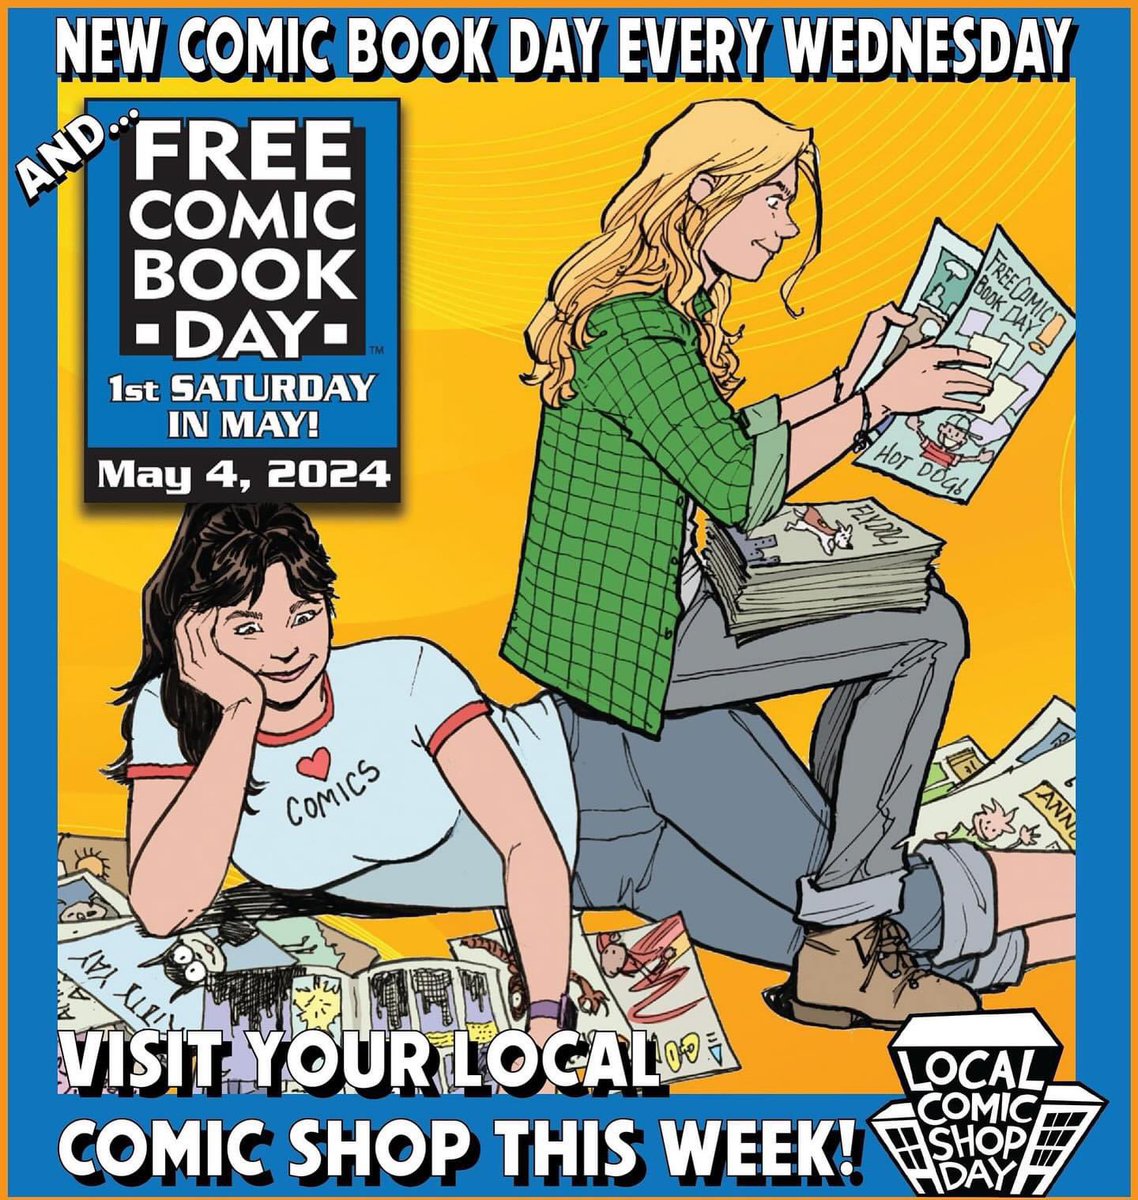 Free Comic Book Day is this Saturday…but every Wednesday is NEW COMIC BOOK DAY!

Don’t forget to support your local comic shops today and everyday!

#supportindiecomics #ReadMoreComics